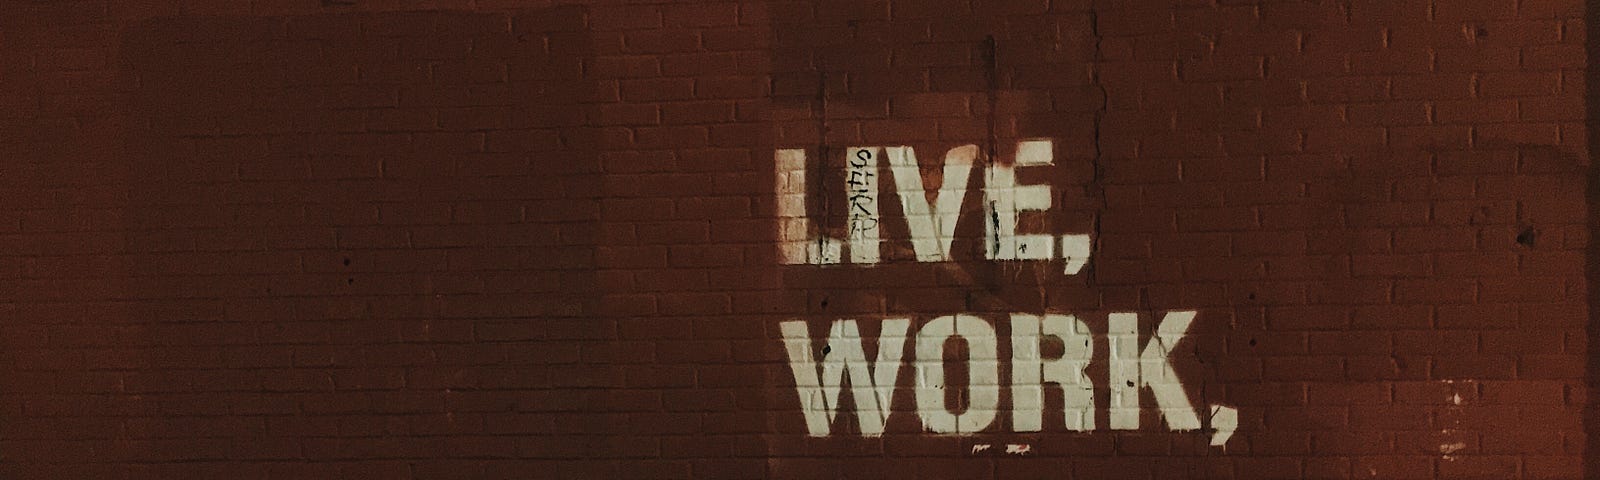 Image of a brown brick wall with the words ‘Live, Work, Create’ painted on it in white.